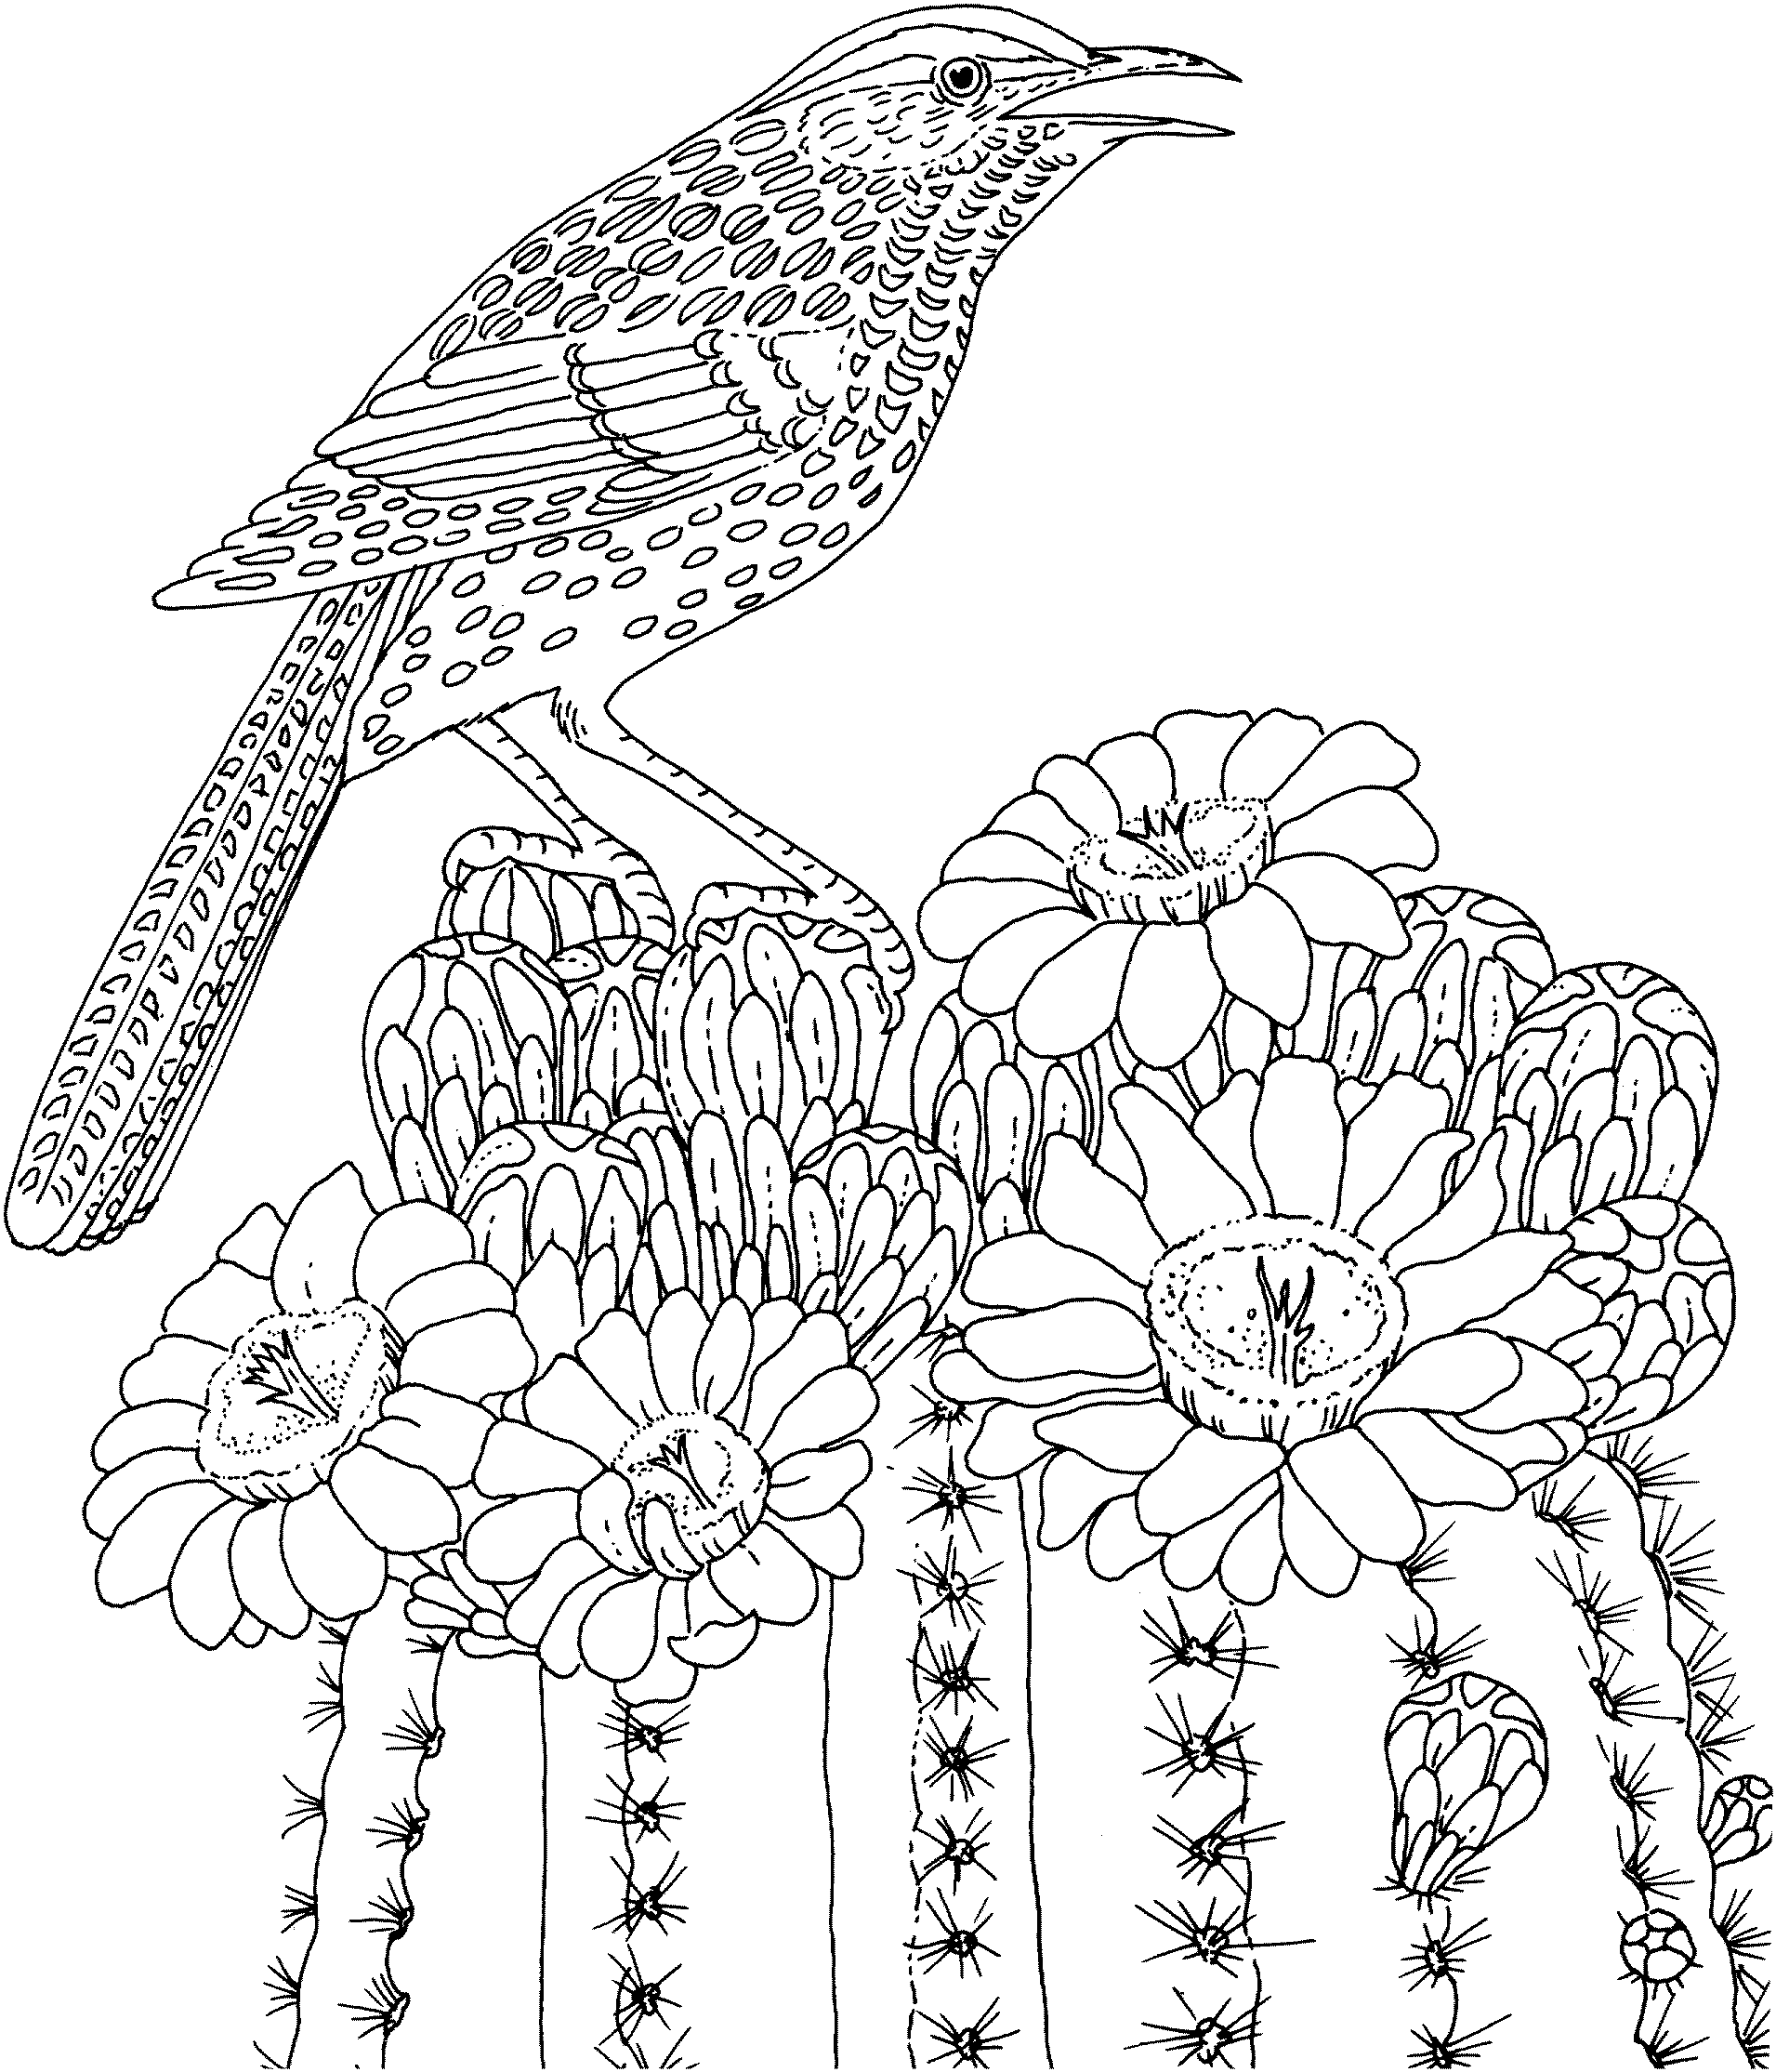 coloring pages for adults - printable coloring pages for adults - adult coloring pages - #14